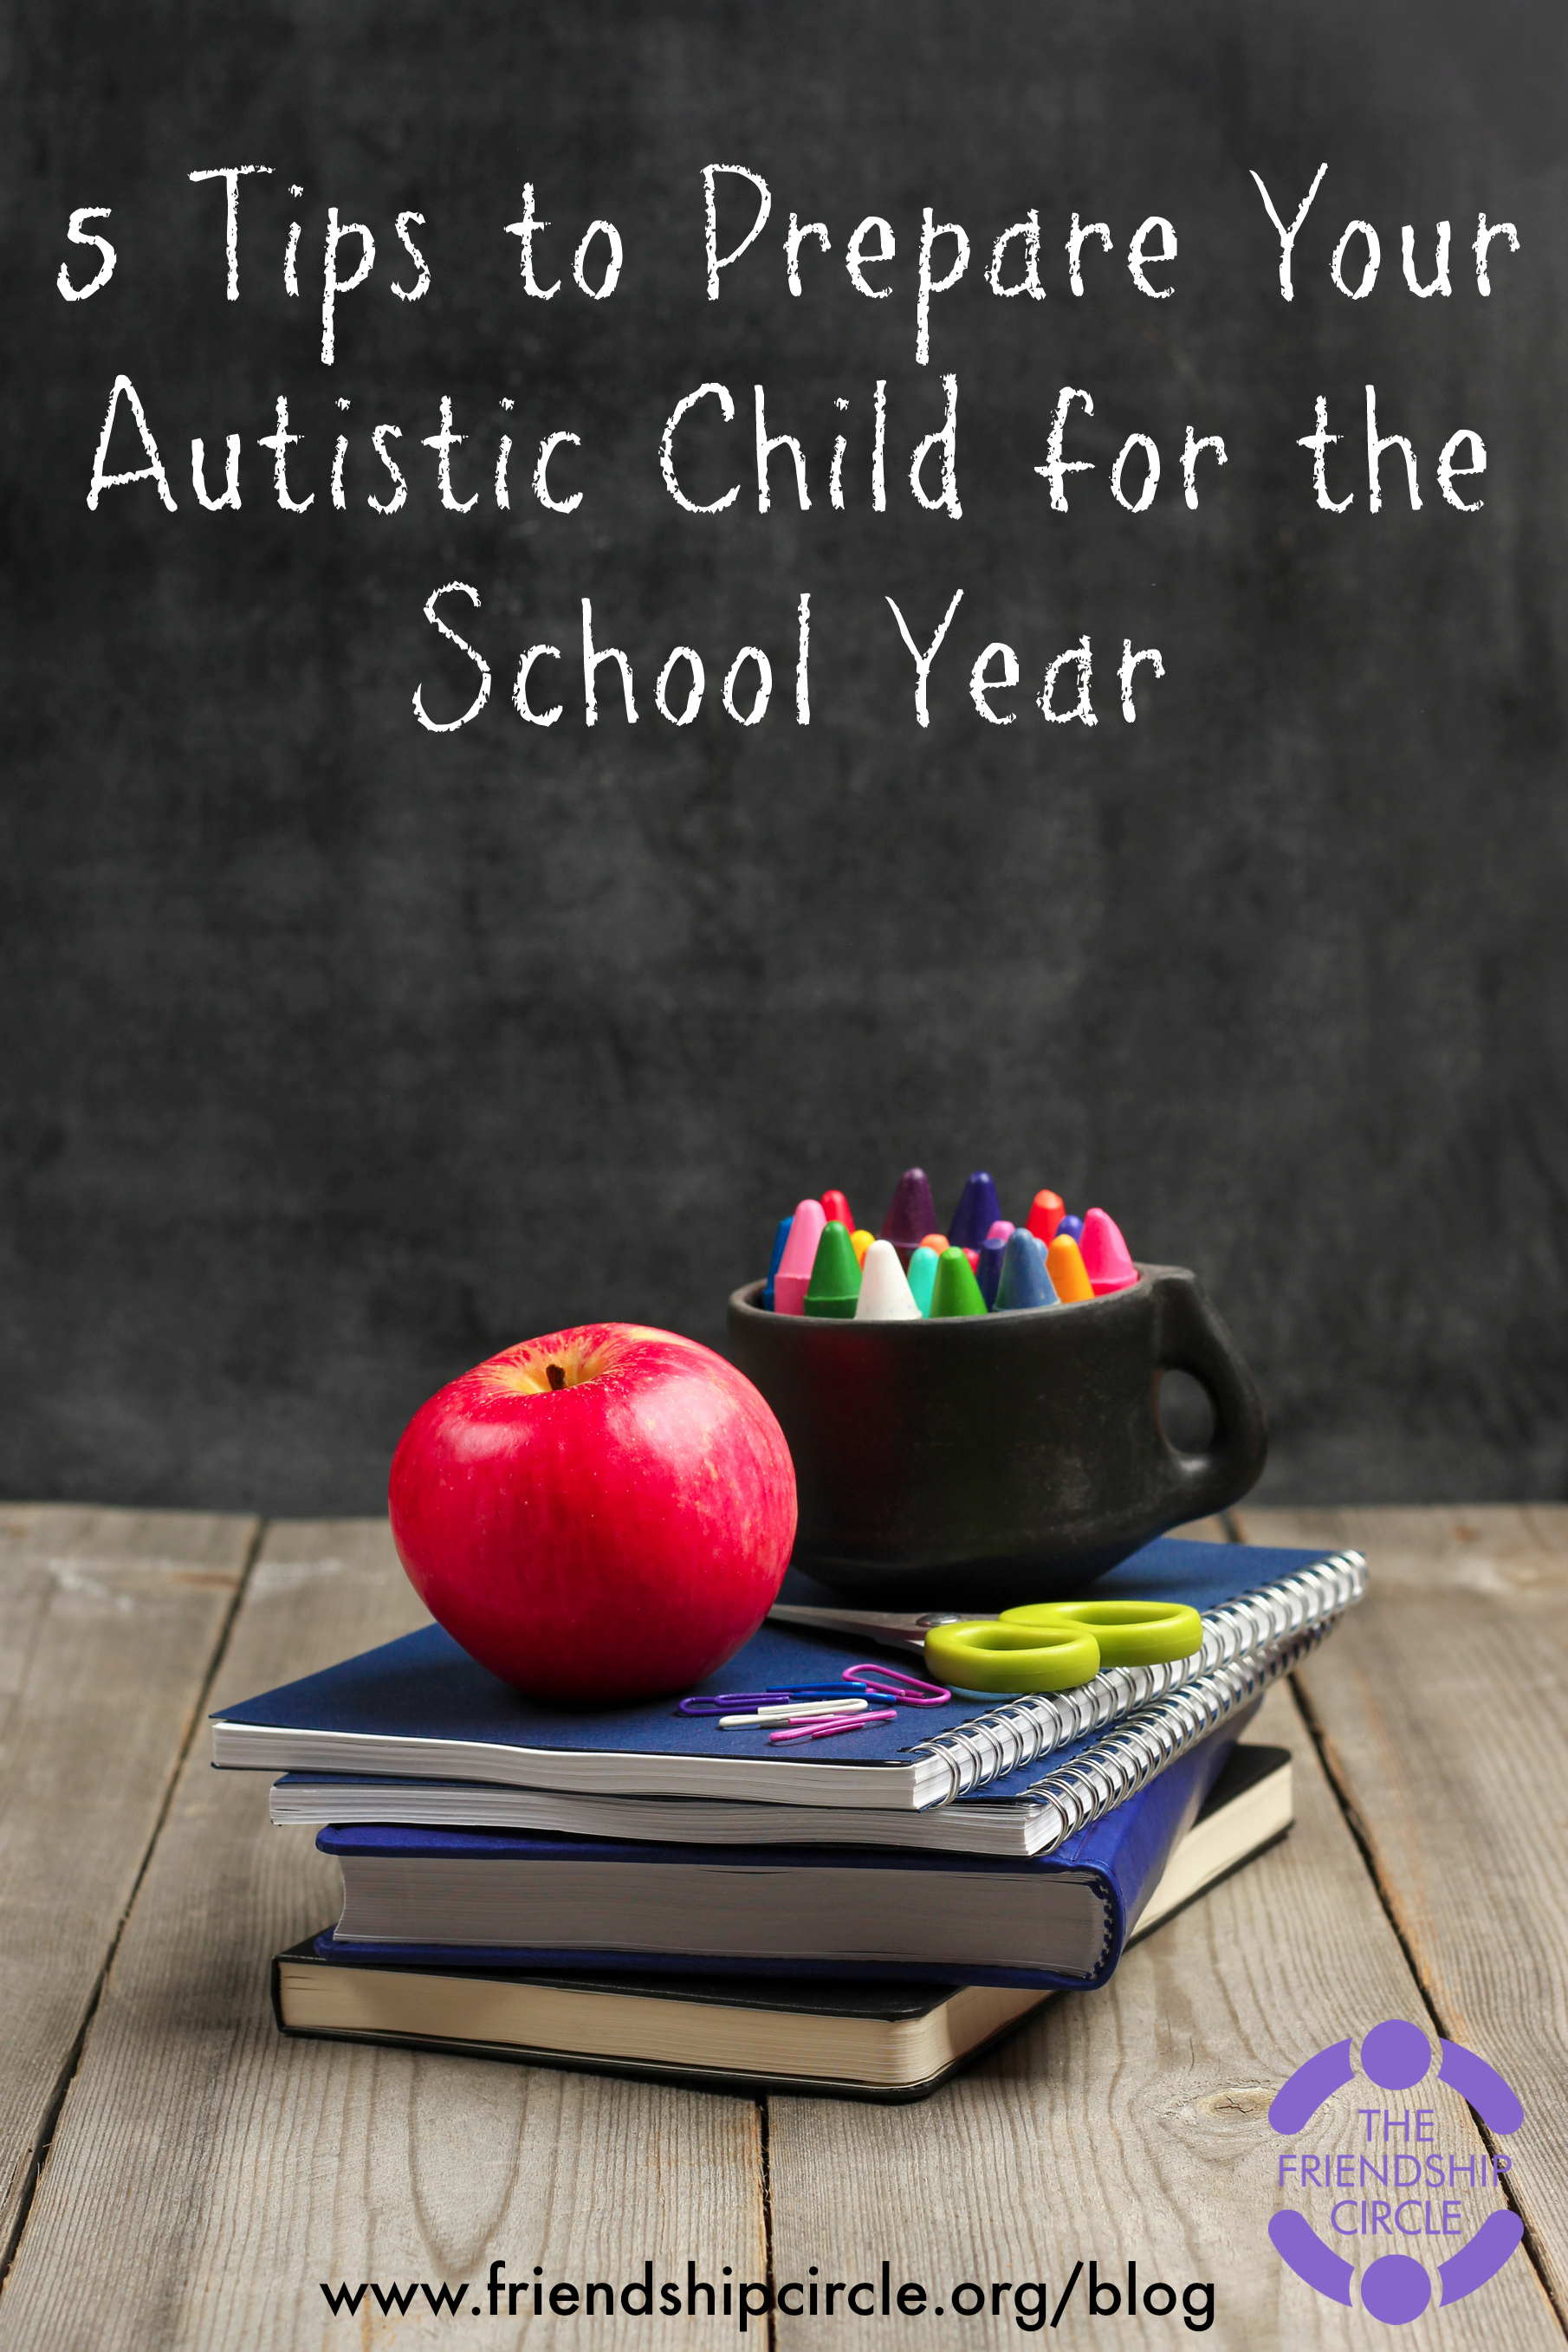 5 Tips to Prepare Your Autistic Child for the School Year